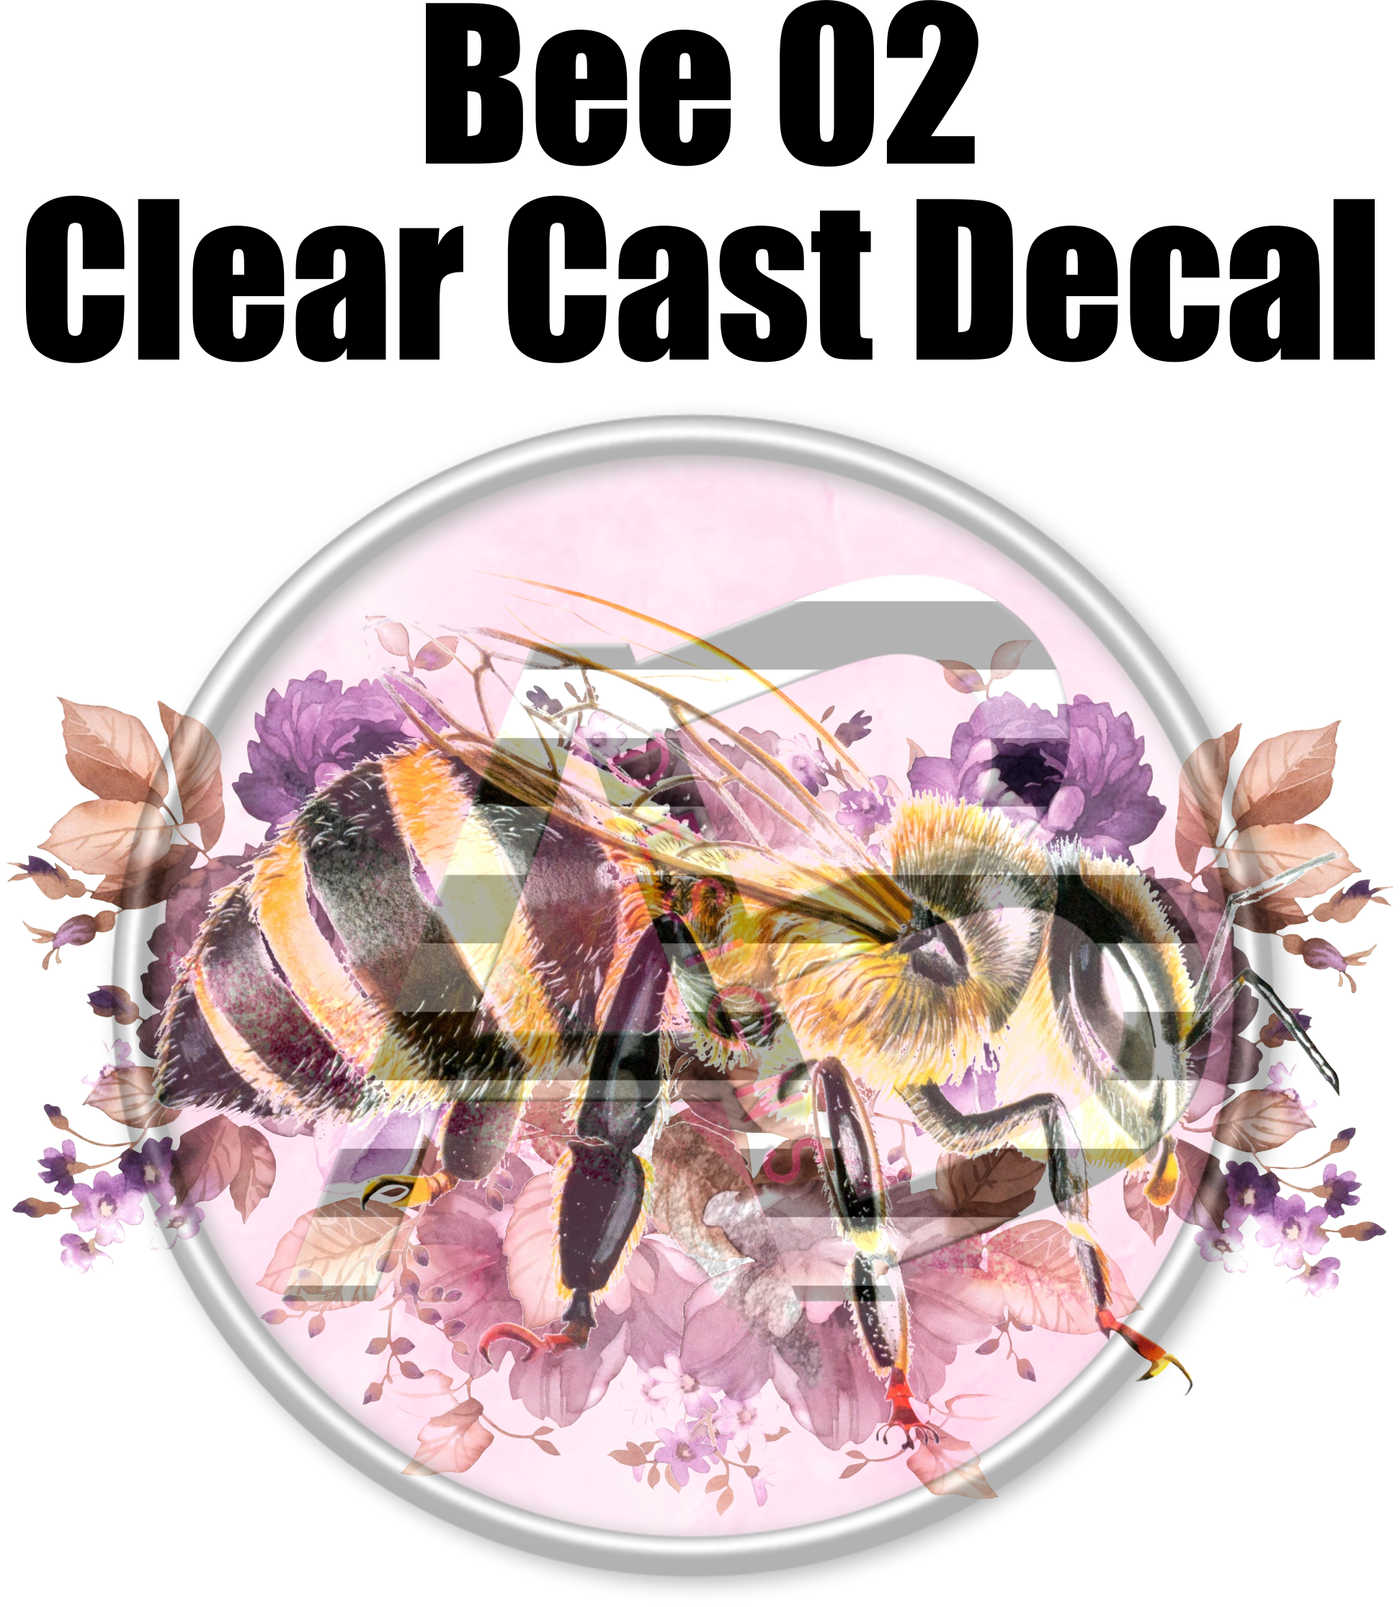 Bee 02 Clear Cast Decal